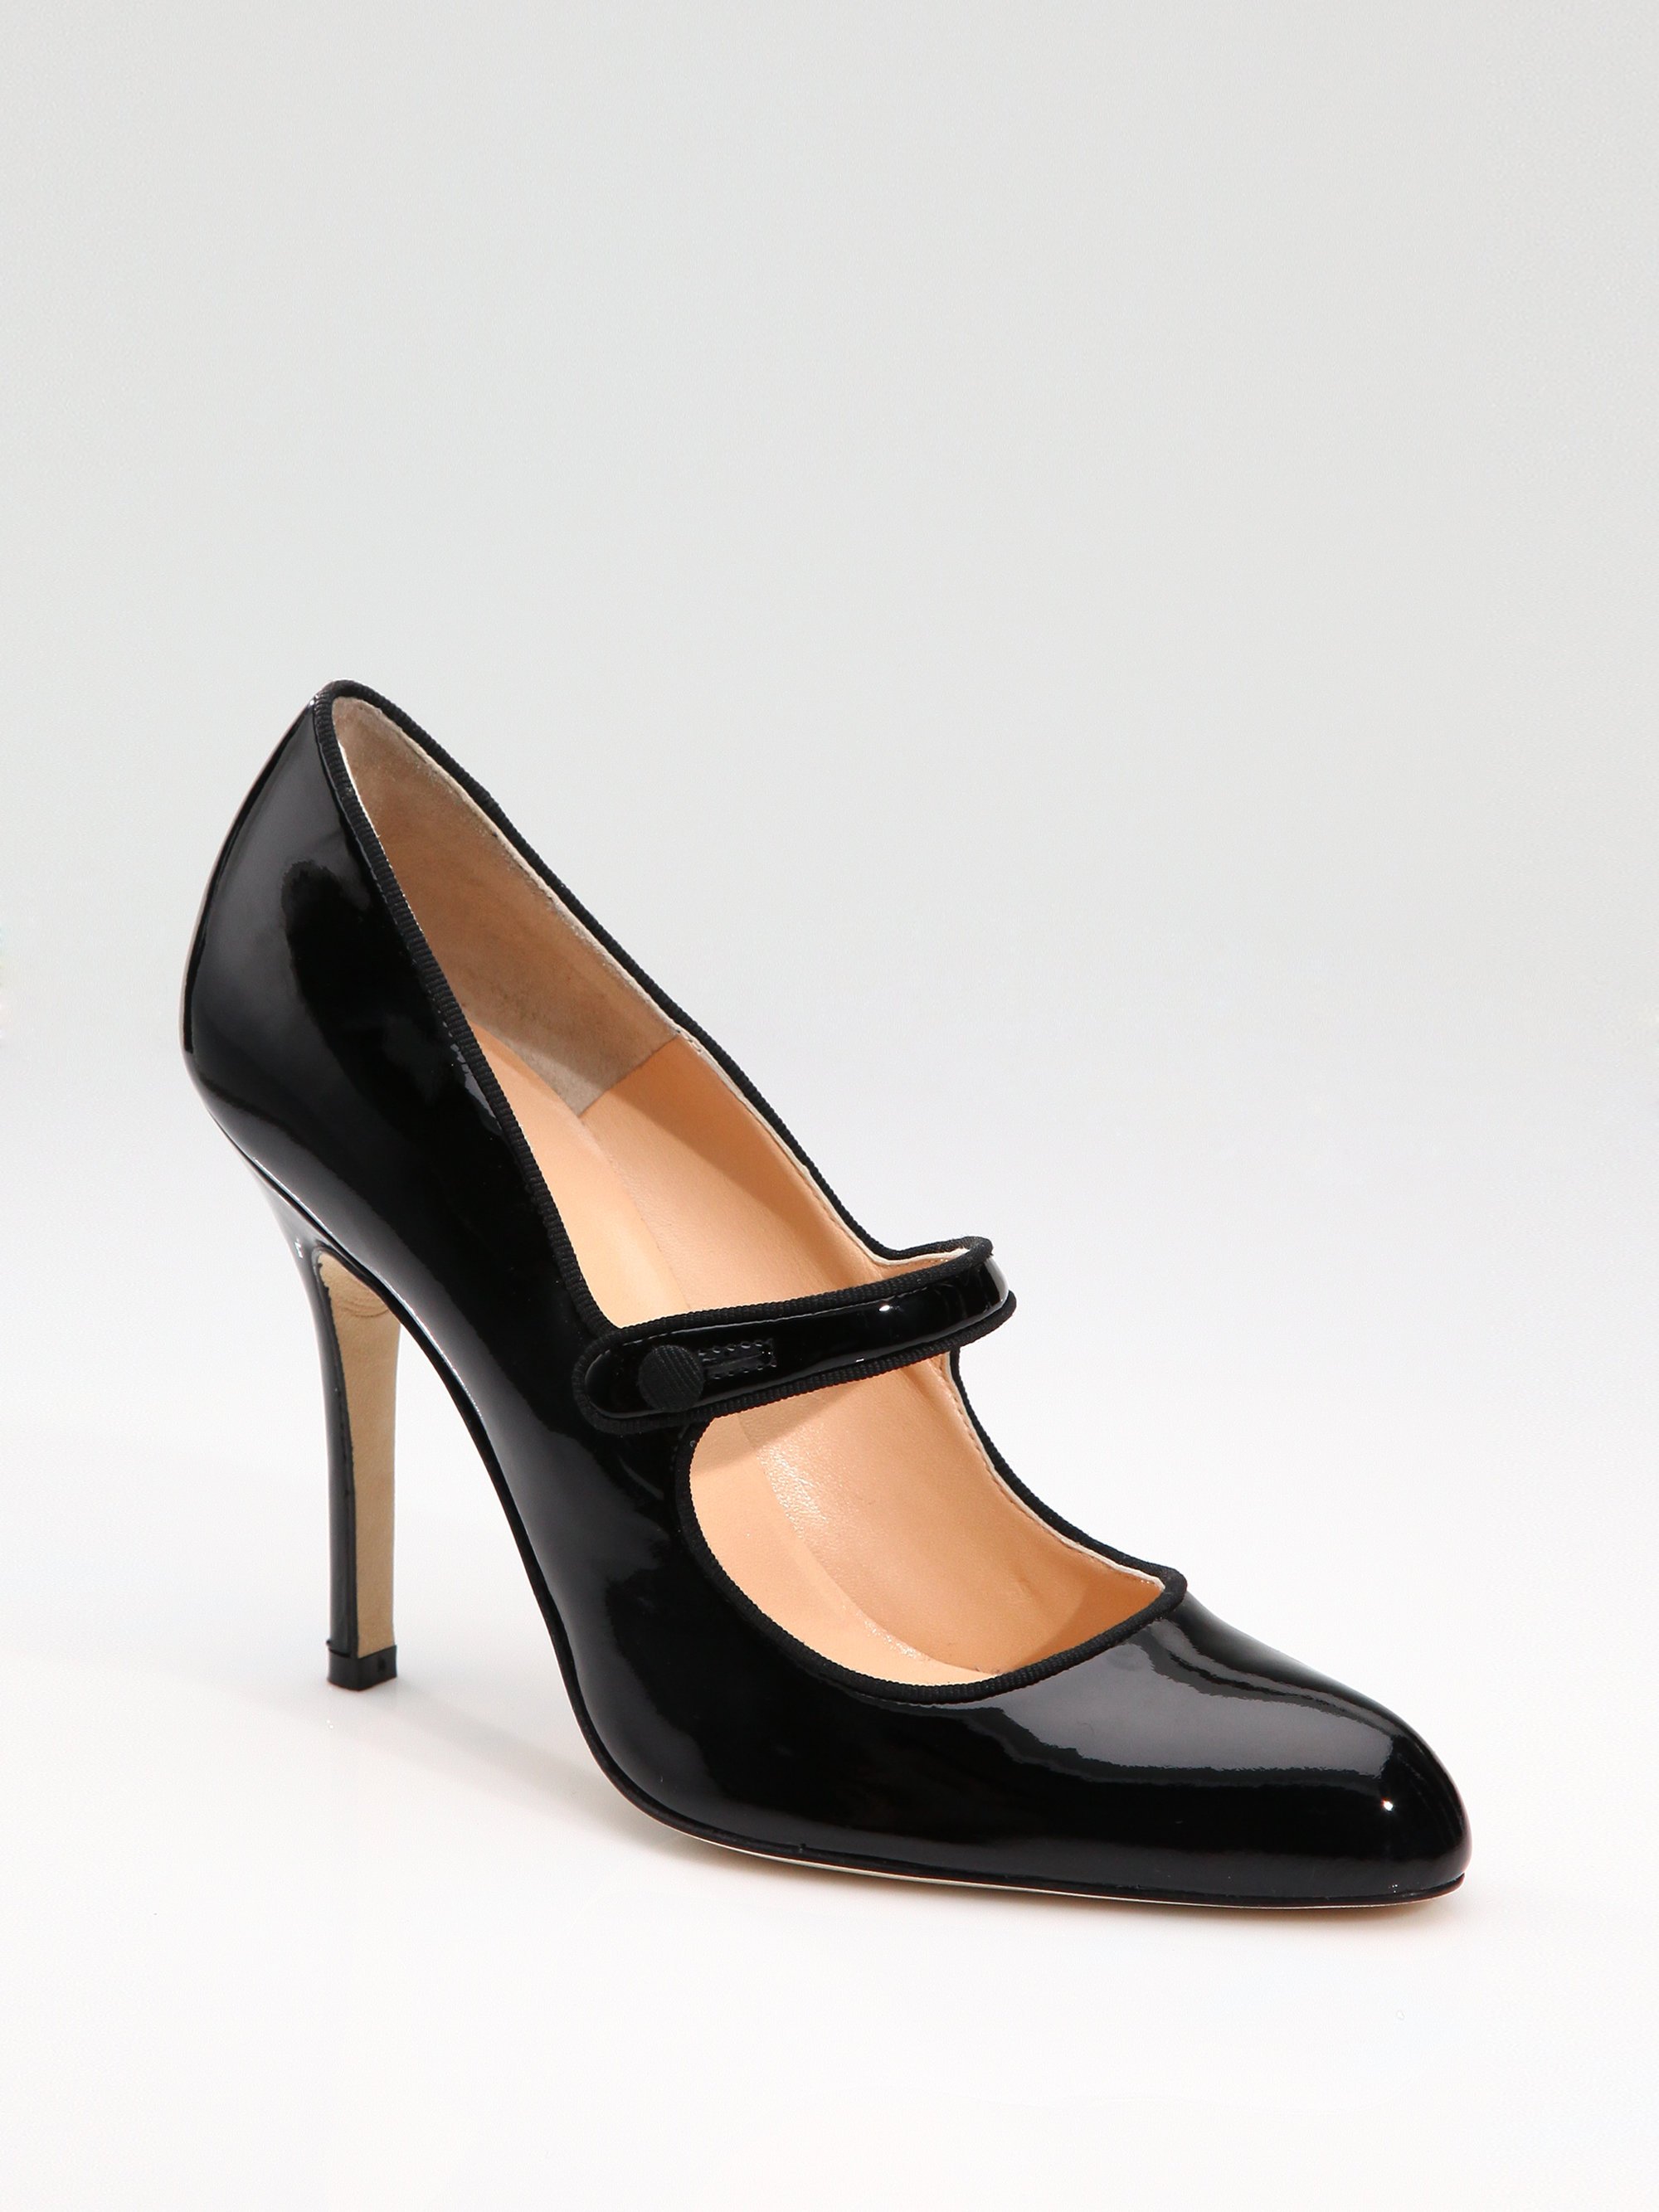 Lyst - Manolo Blahnik Campy Patent Leather Mary Jane Pumps 